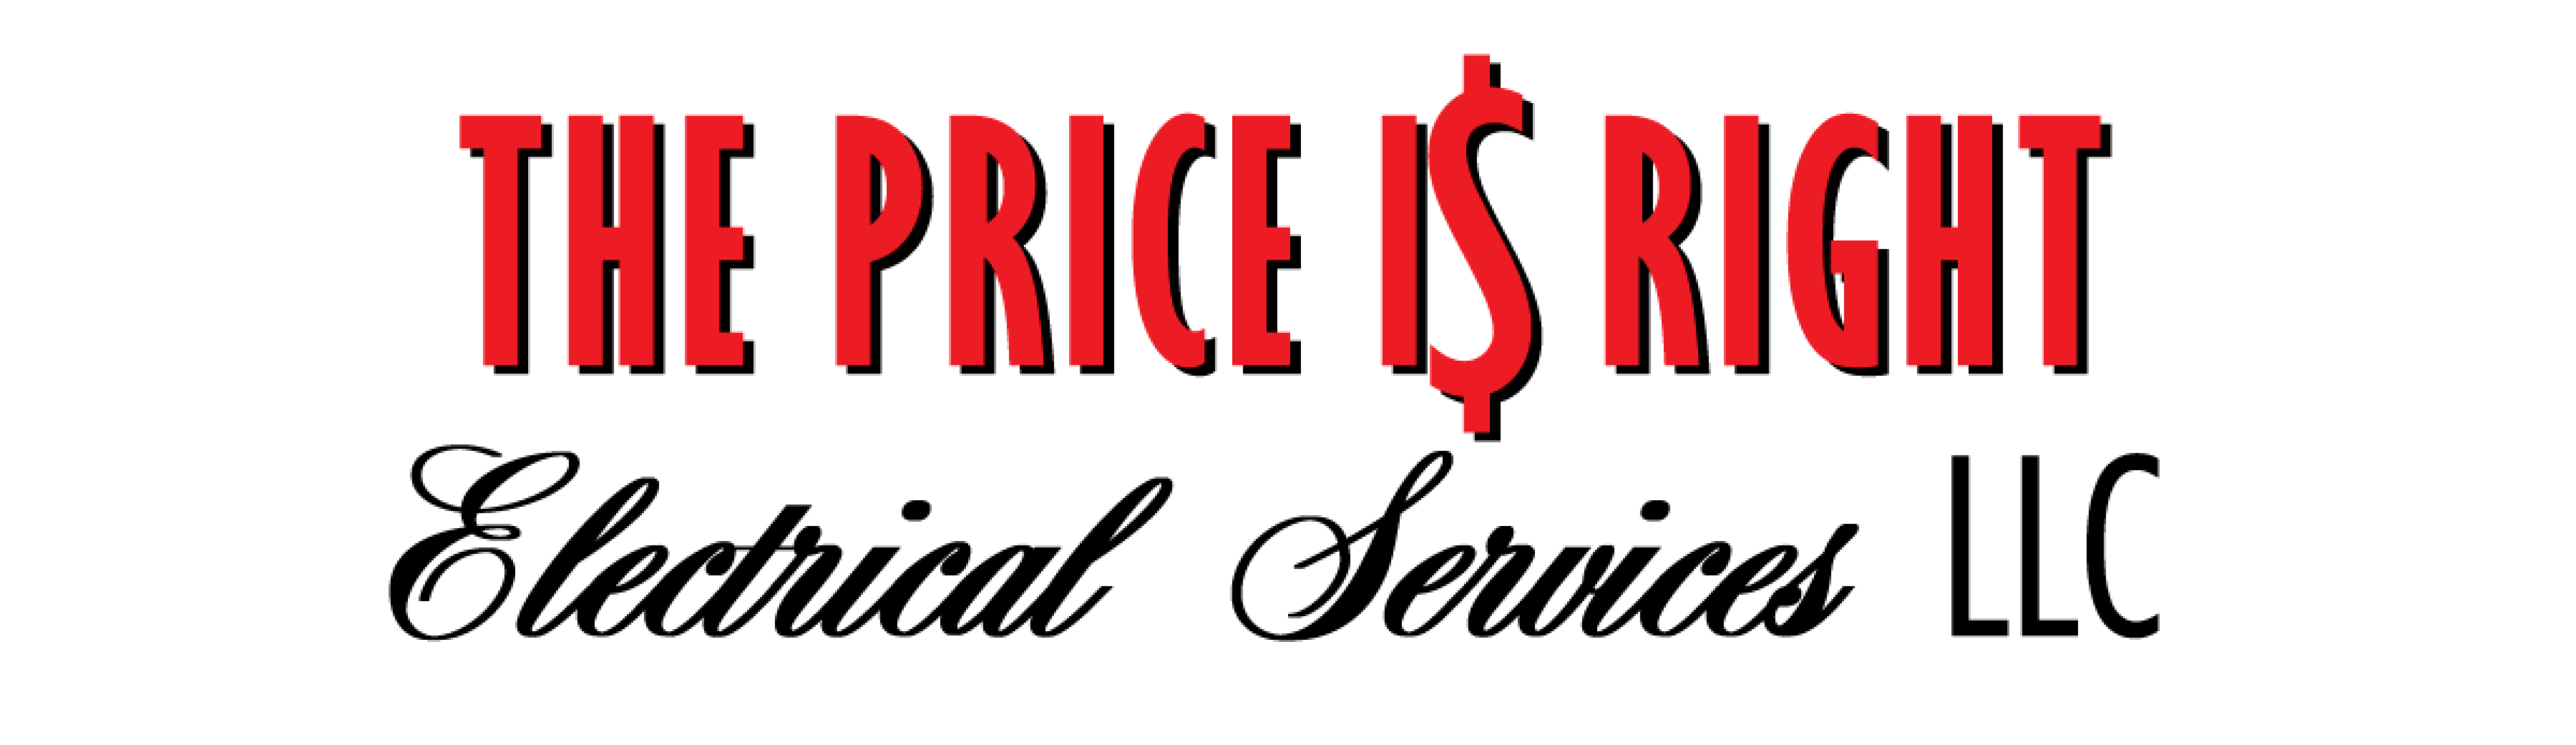 The Price is Right Electrical Services